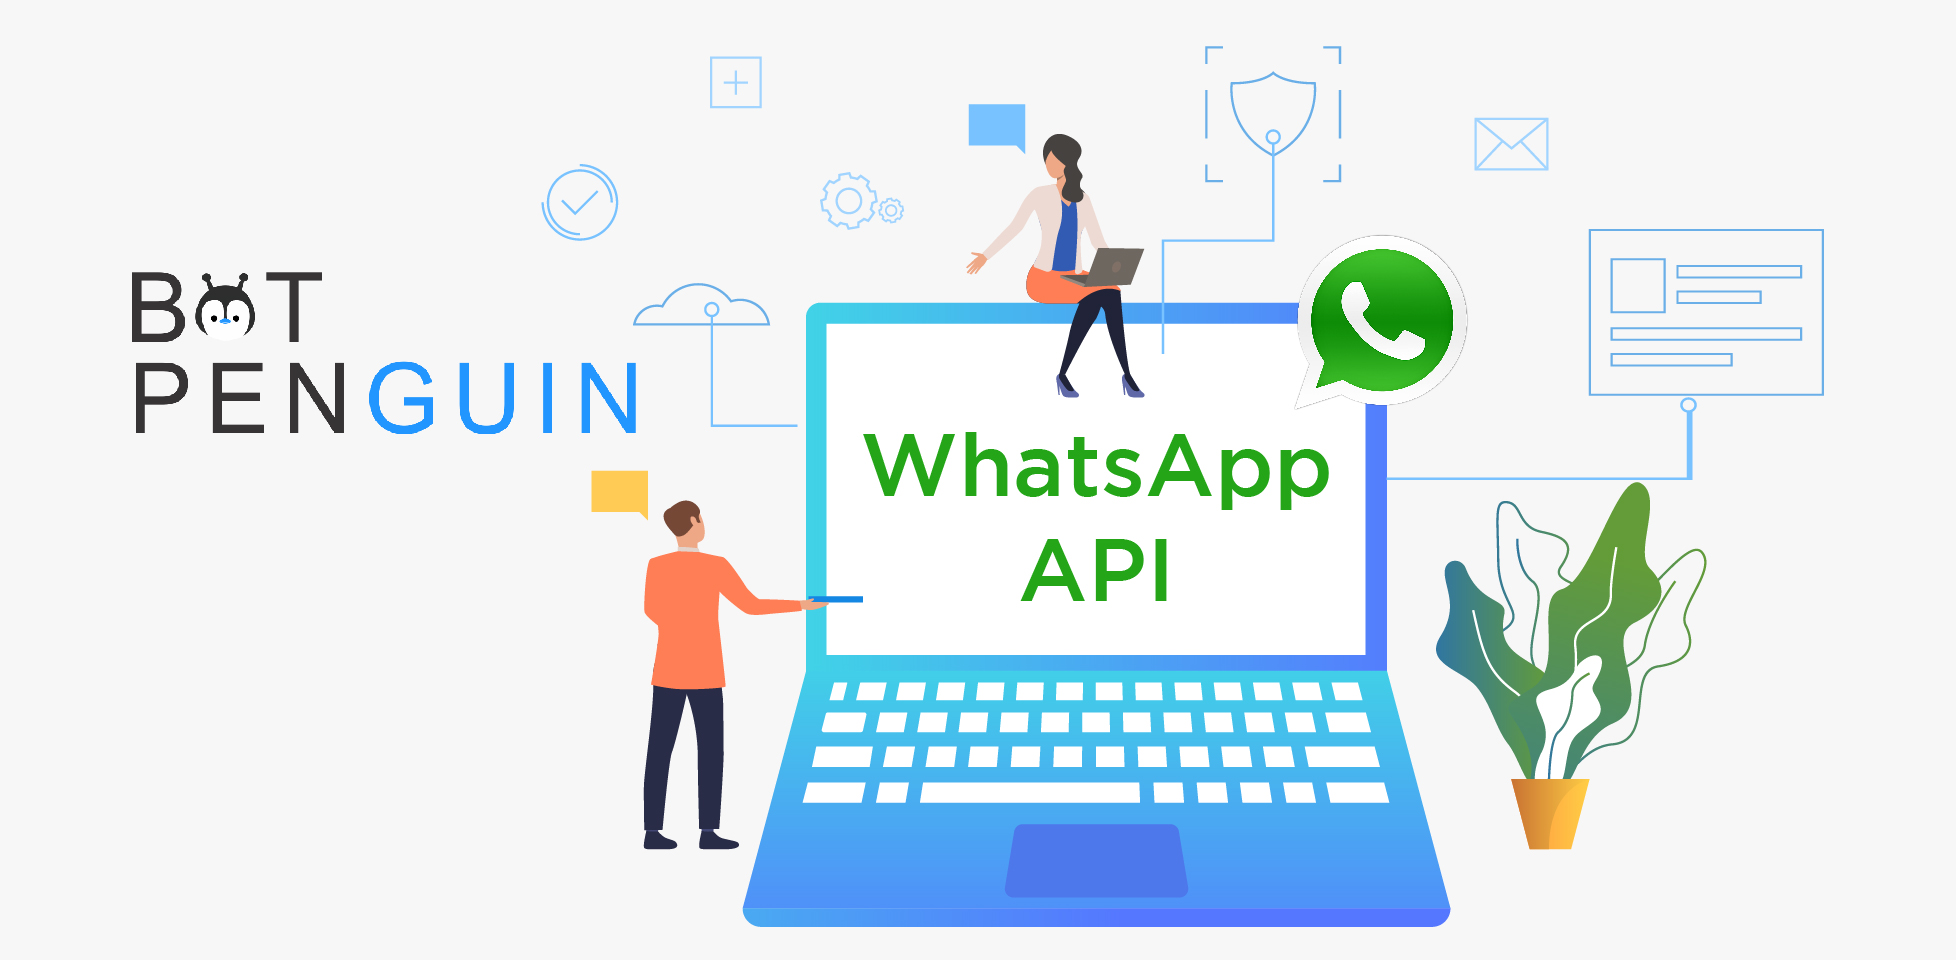 BotPenguin's WhatsApp API can help you expand your company.